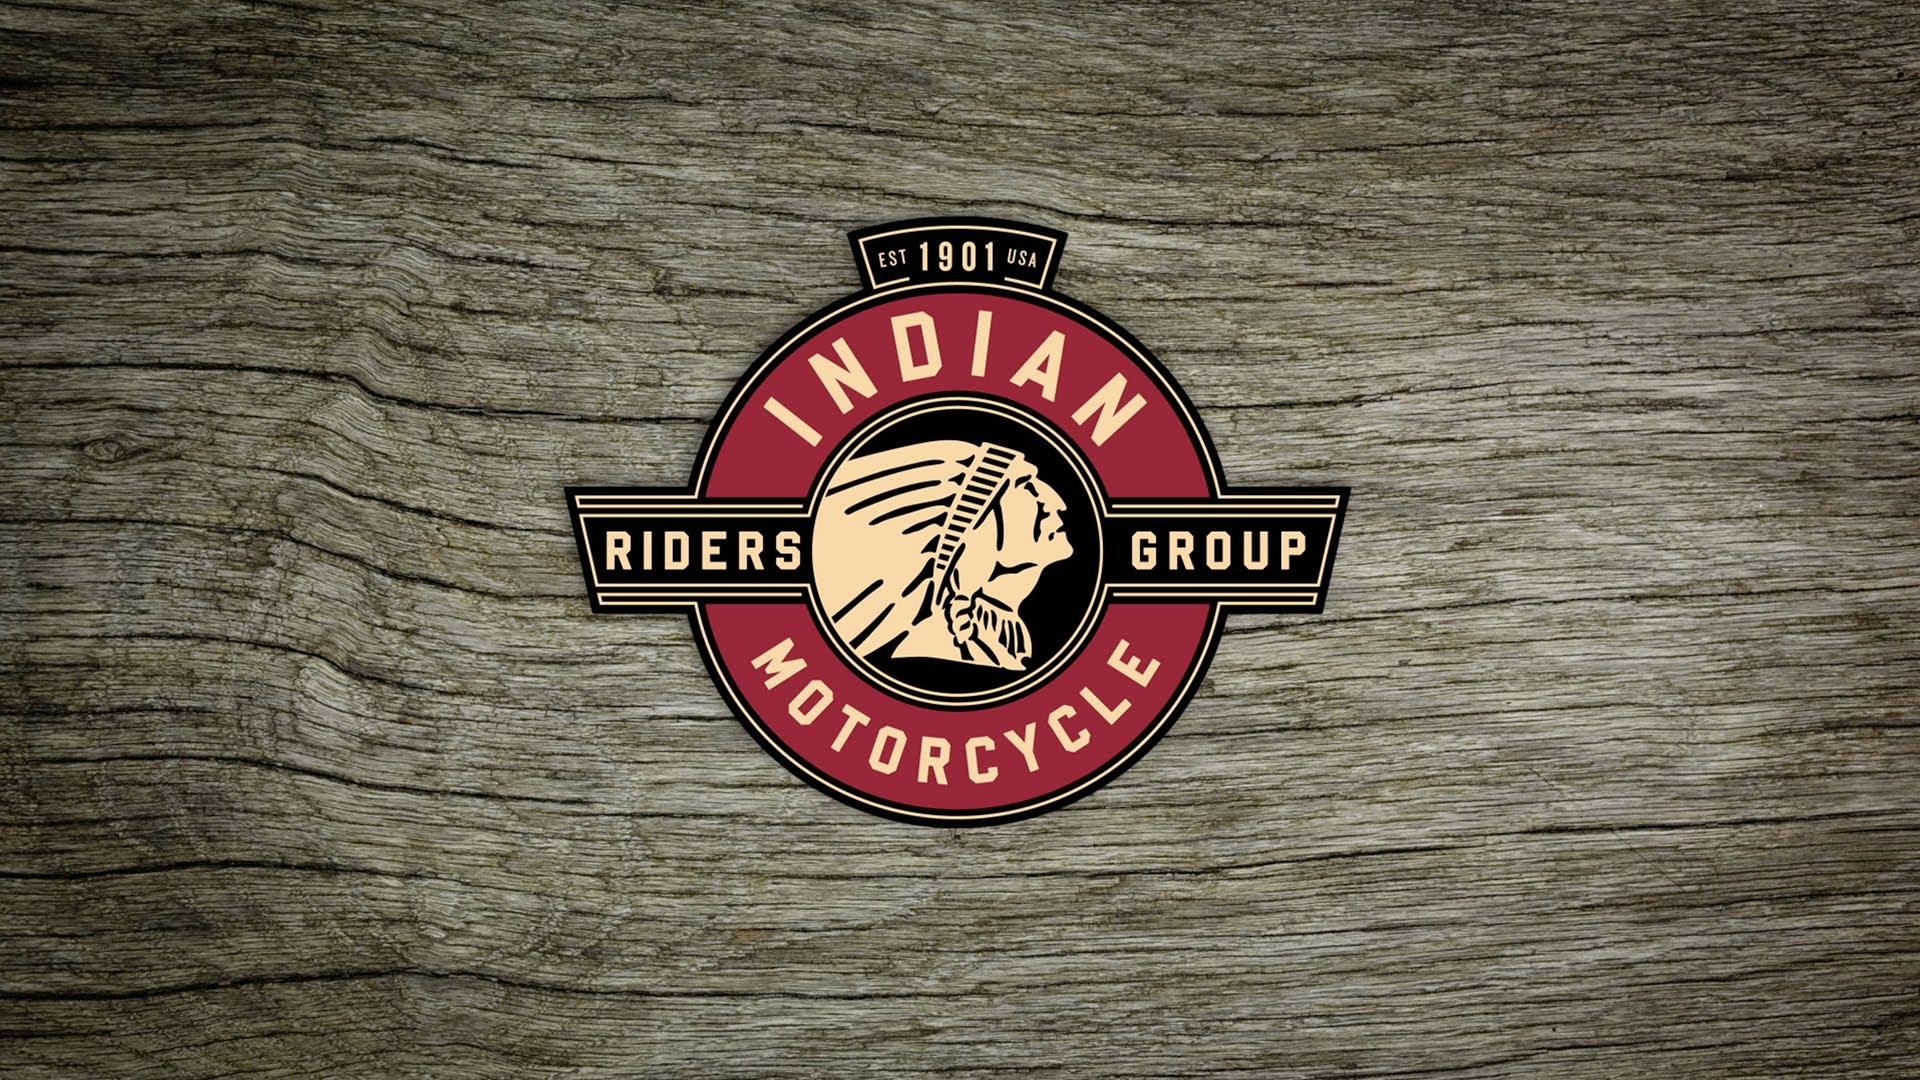 Indian Motorcycle Pictures  Download Free Images on Unsplash